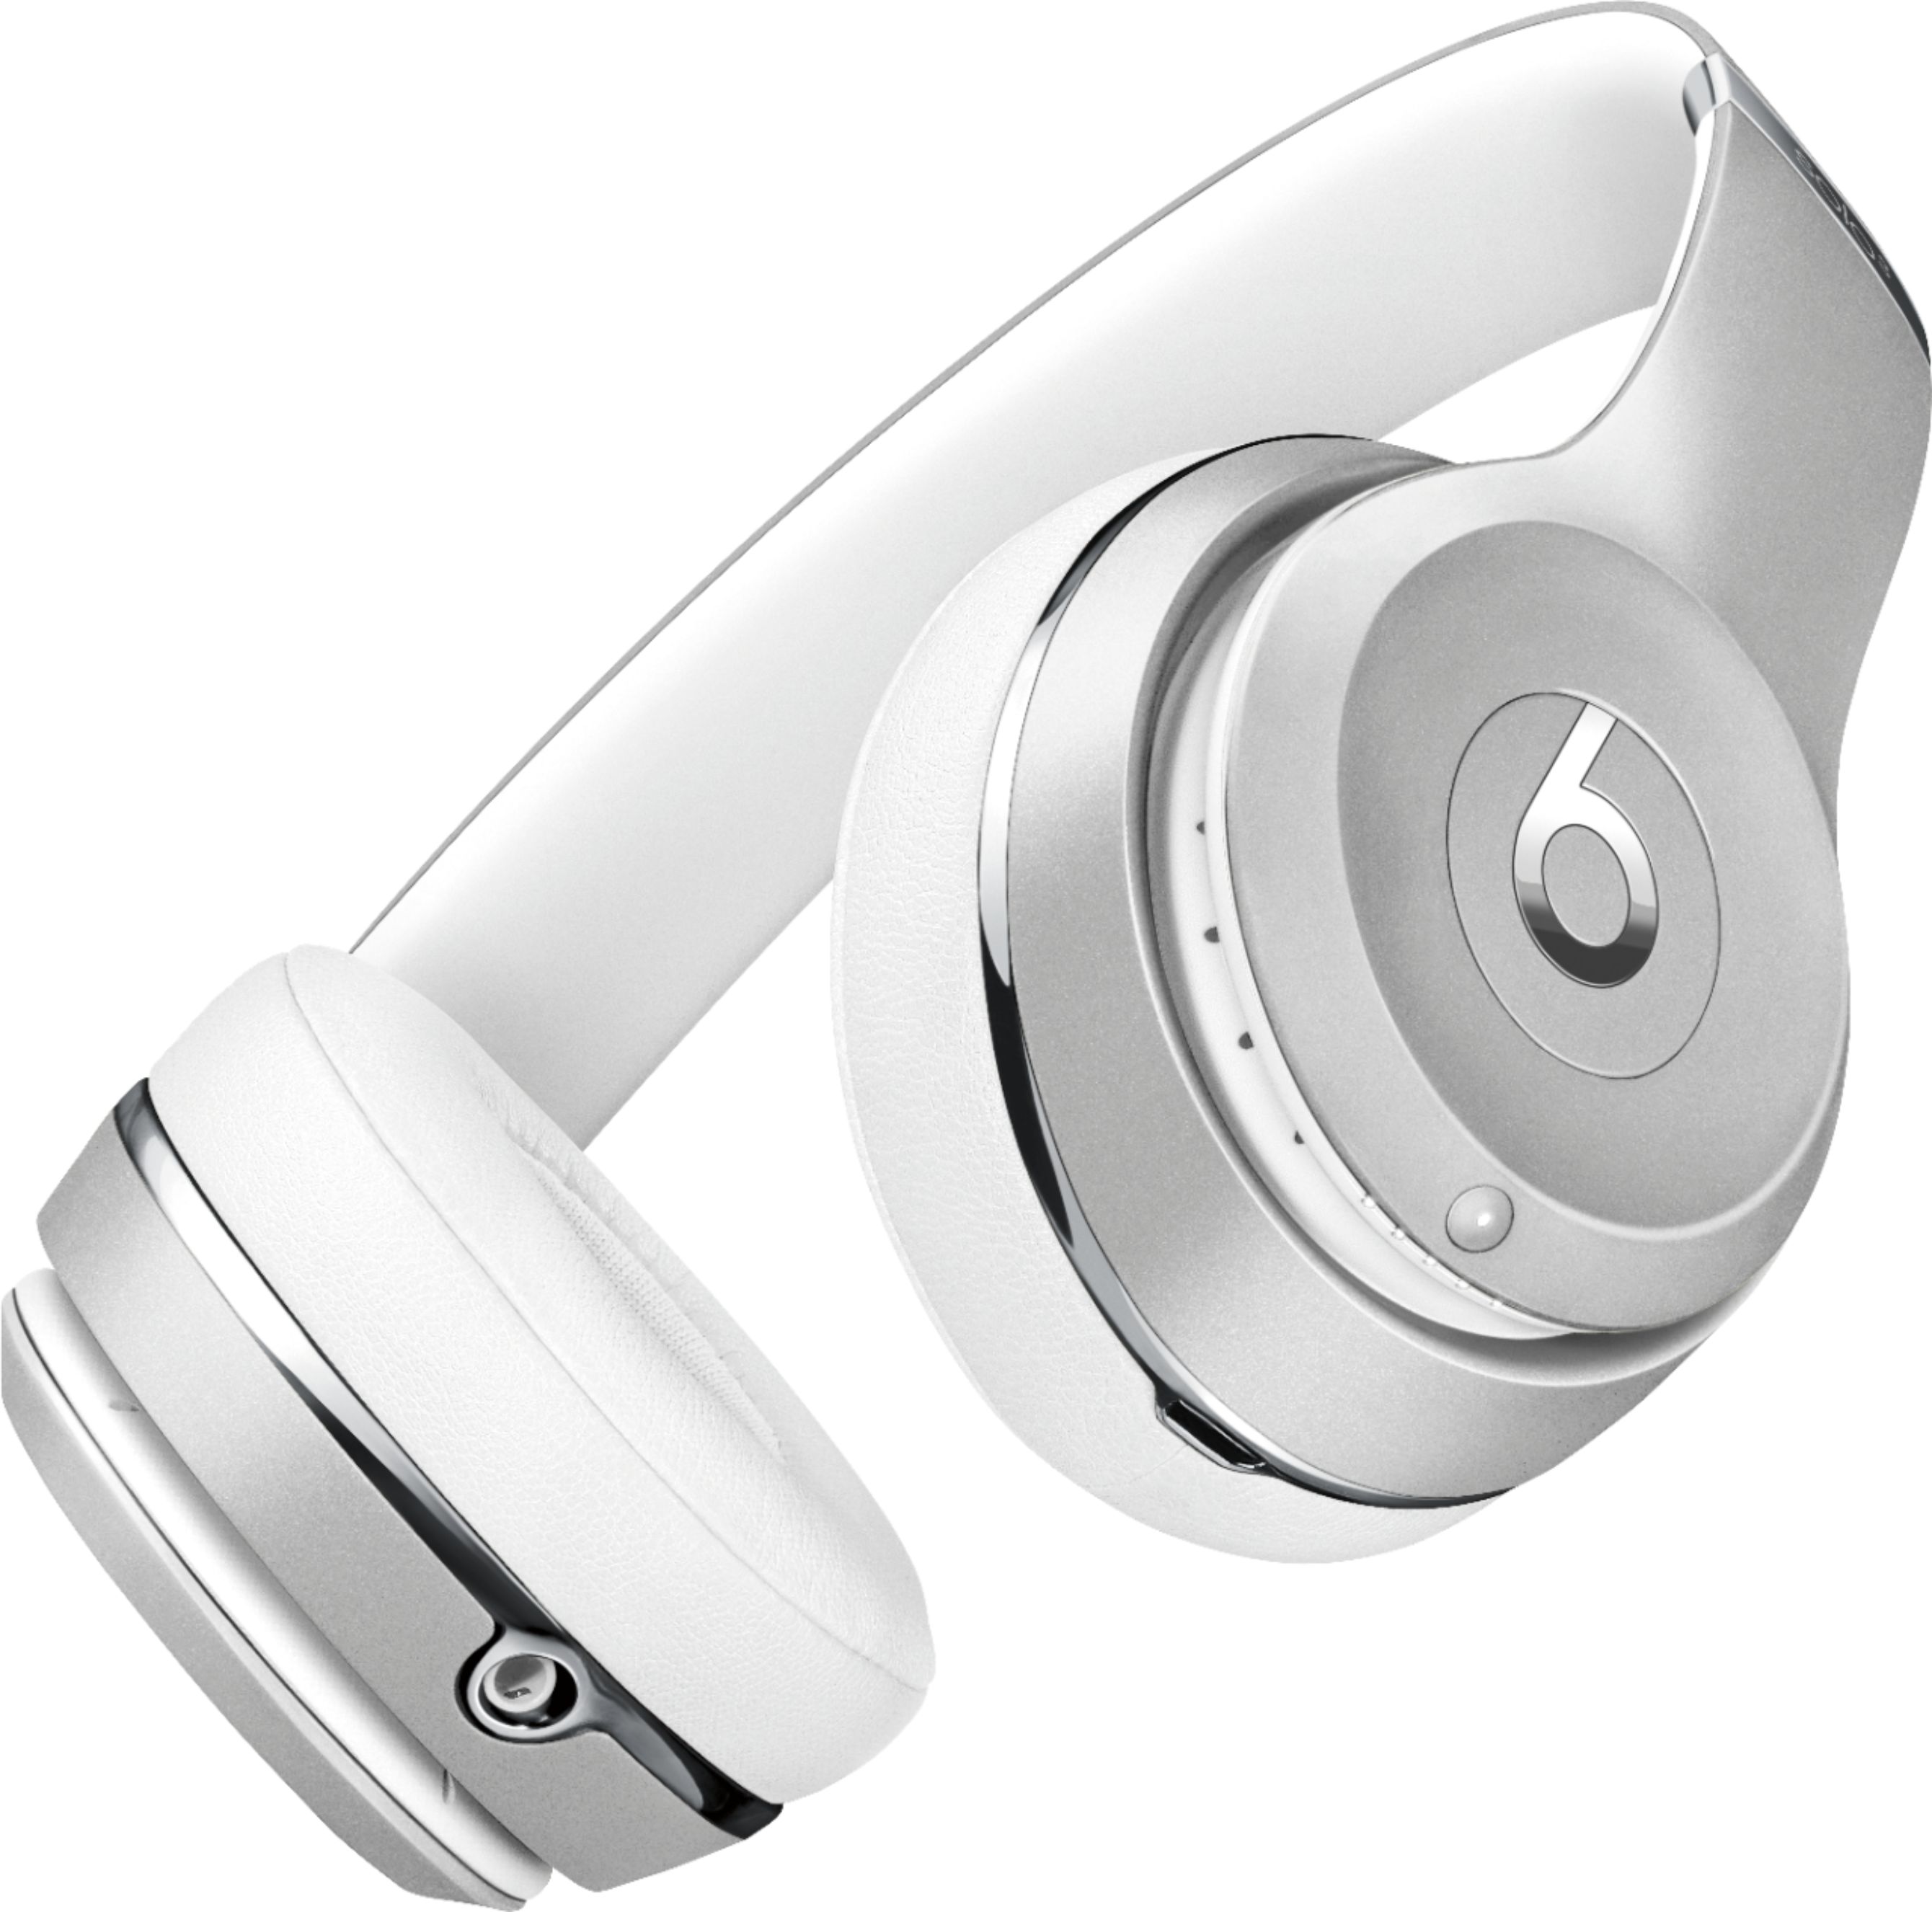 Beats by Dr. Dre Solo³ The Beats Icon Collection Wireless On-Ear 